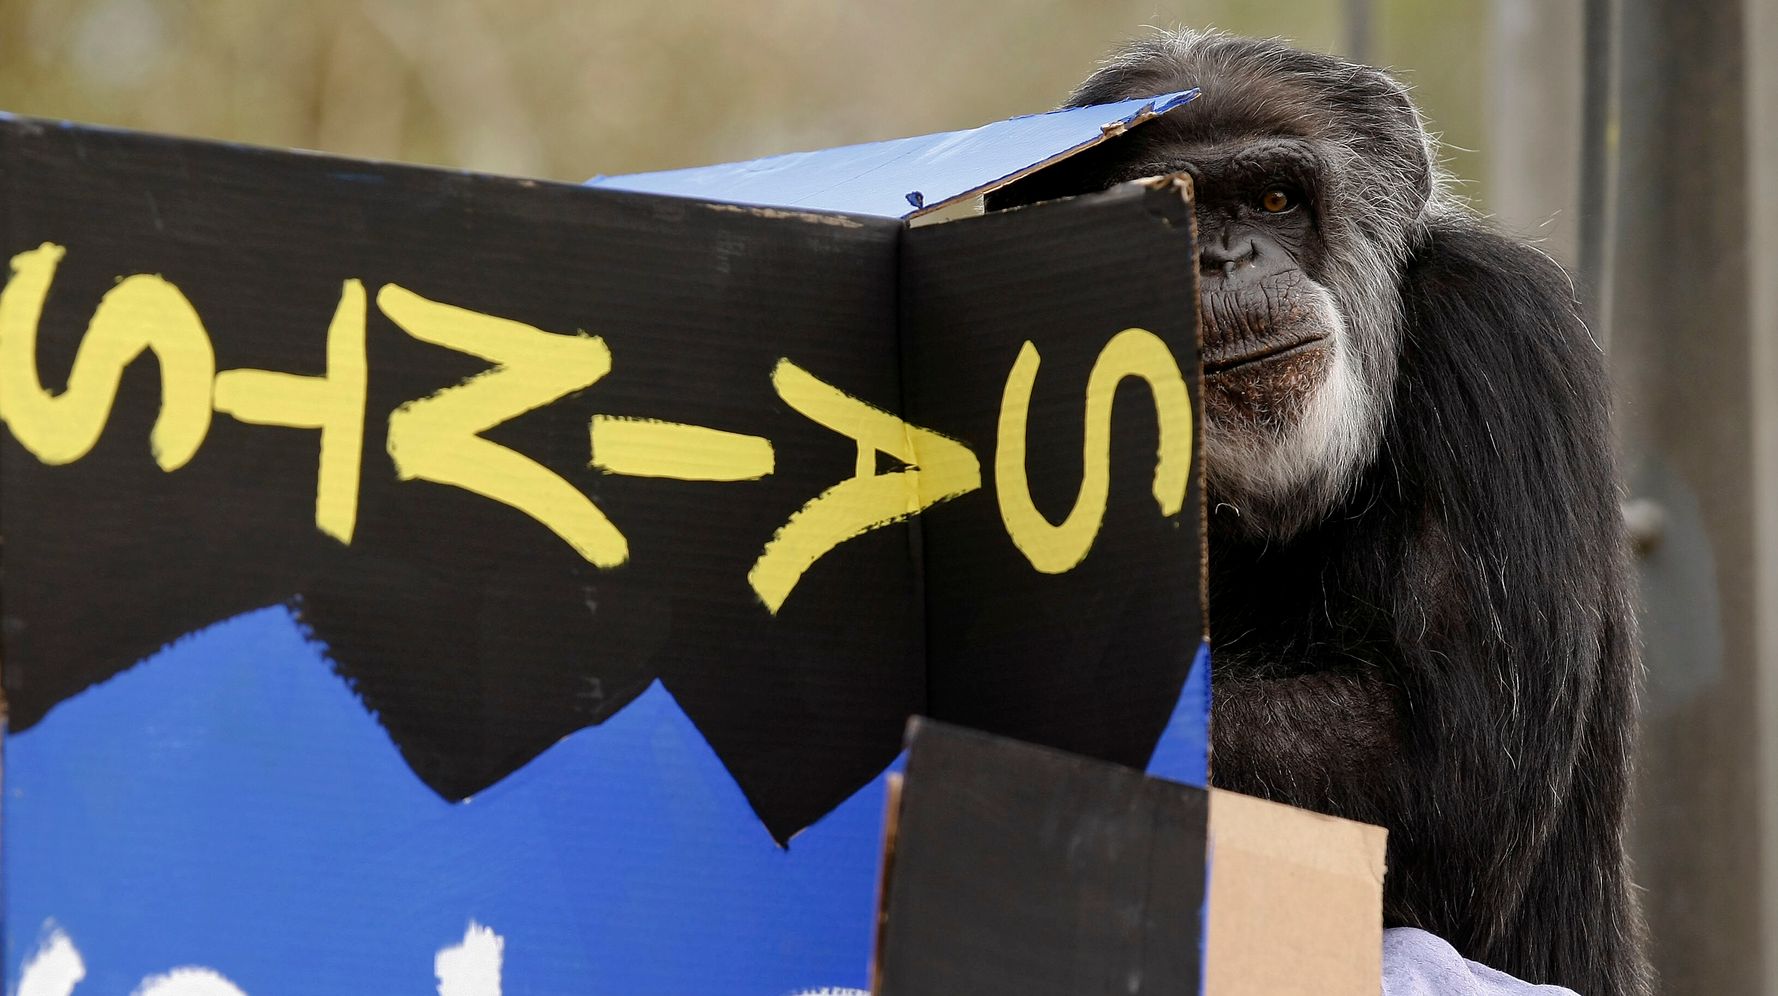 Cobby, The Oldest Male Chimpanzee Living In U.S. Zoo, Dies At 63